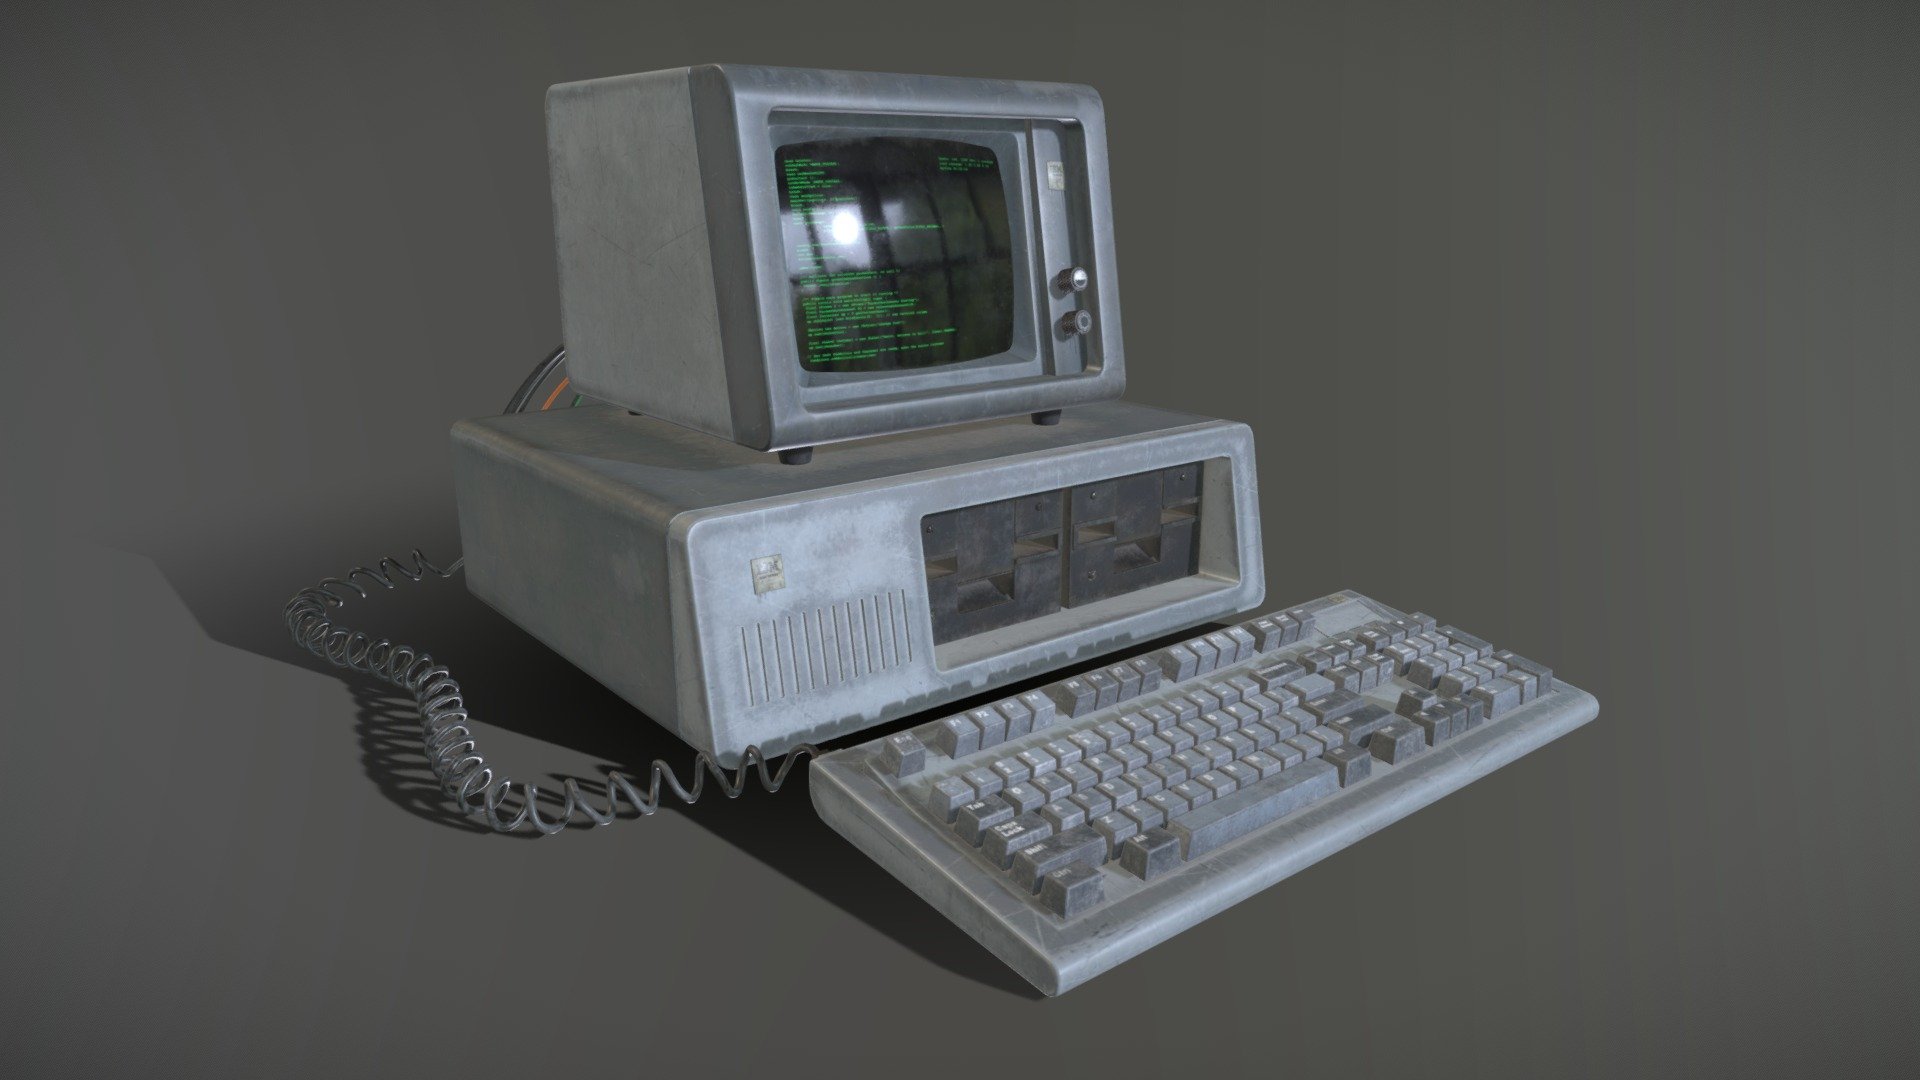 3D render and textures of an old IBM Computer. Modeled in Cinema 4D and Maya, textured in Substance Painter 3d model